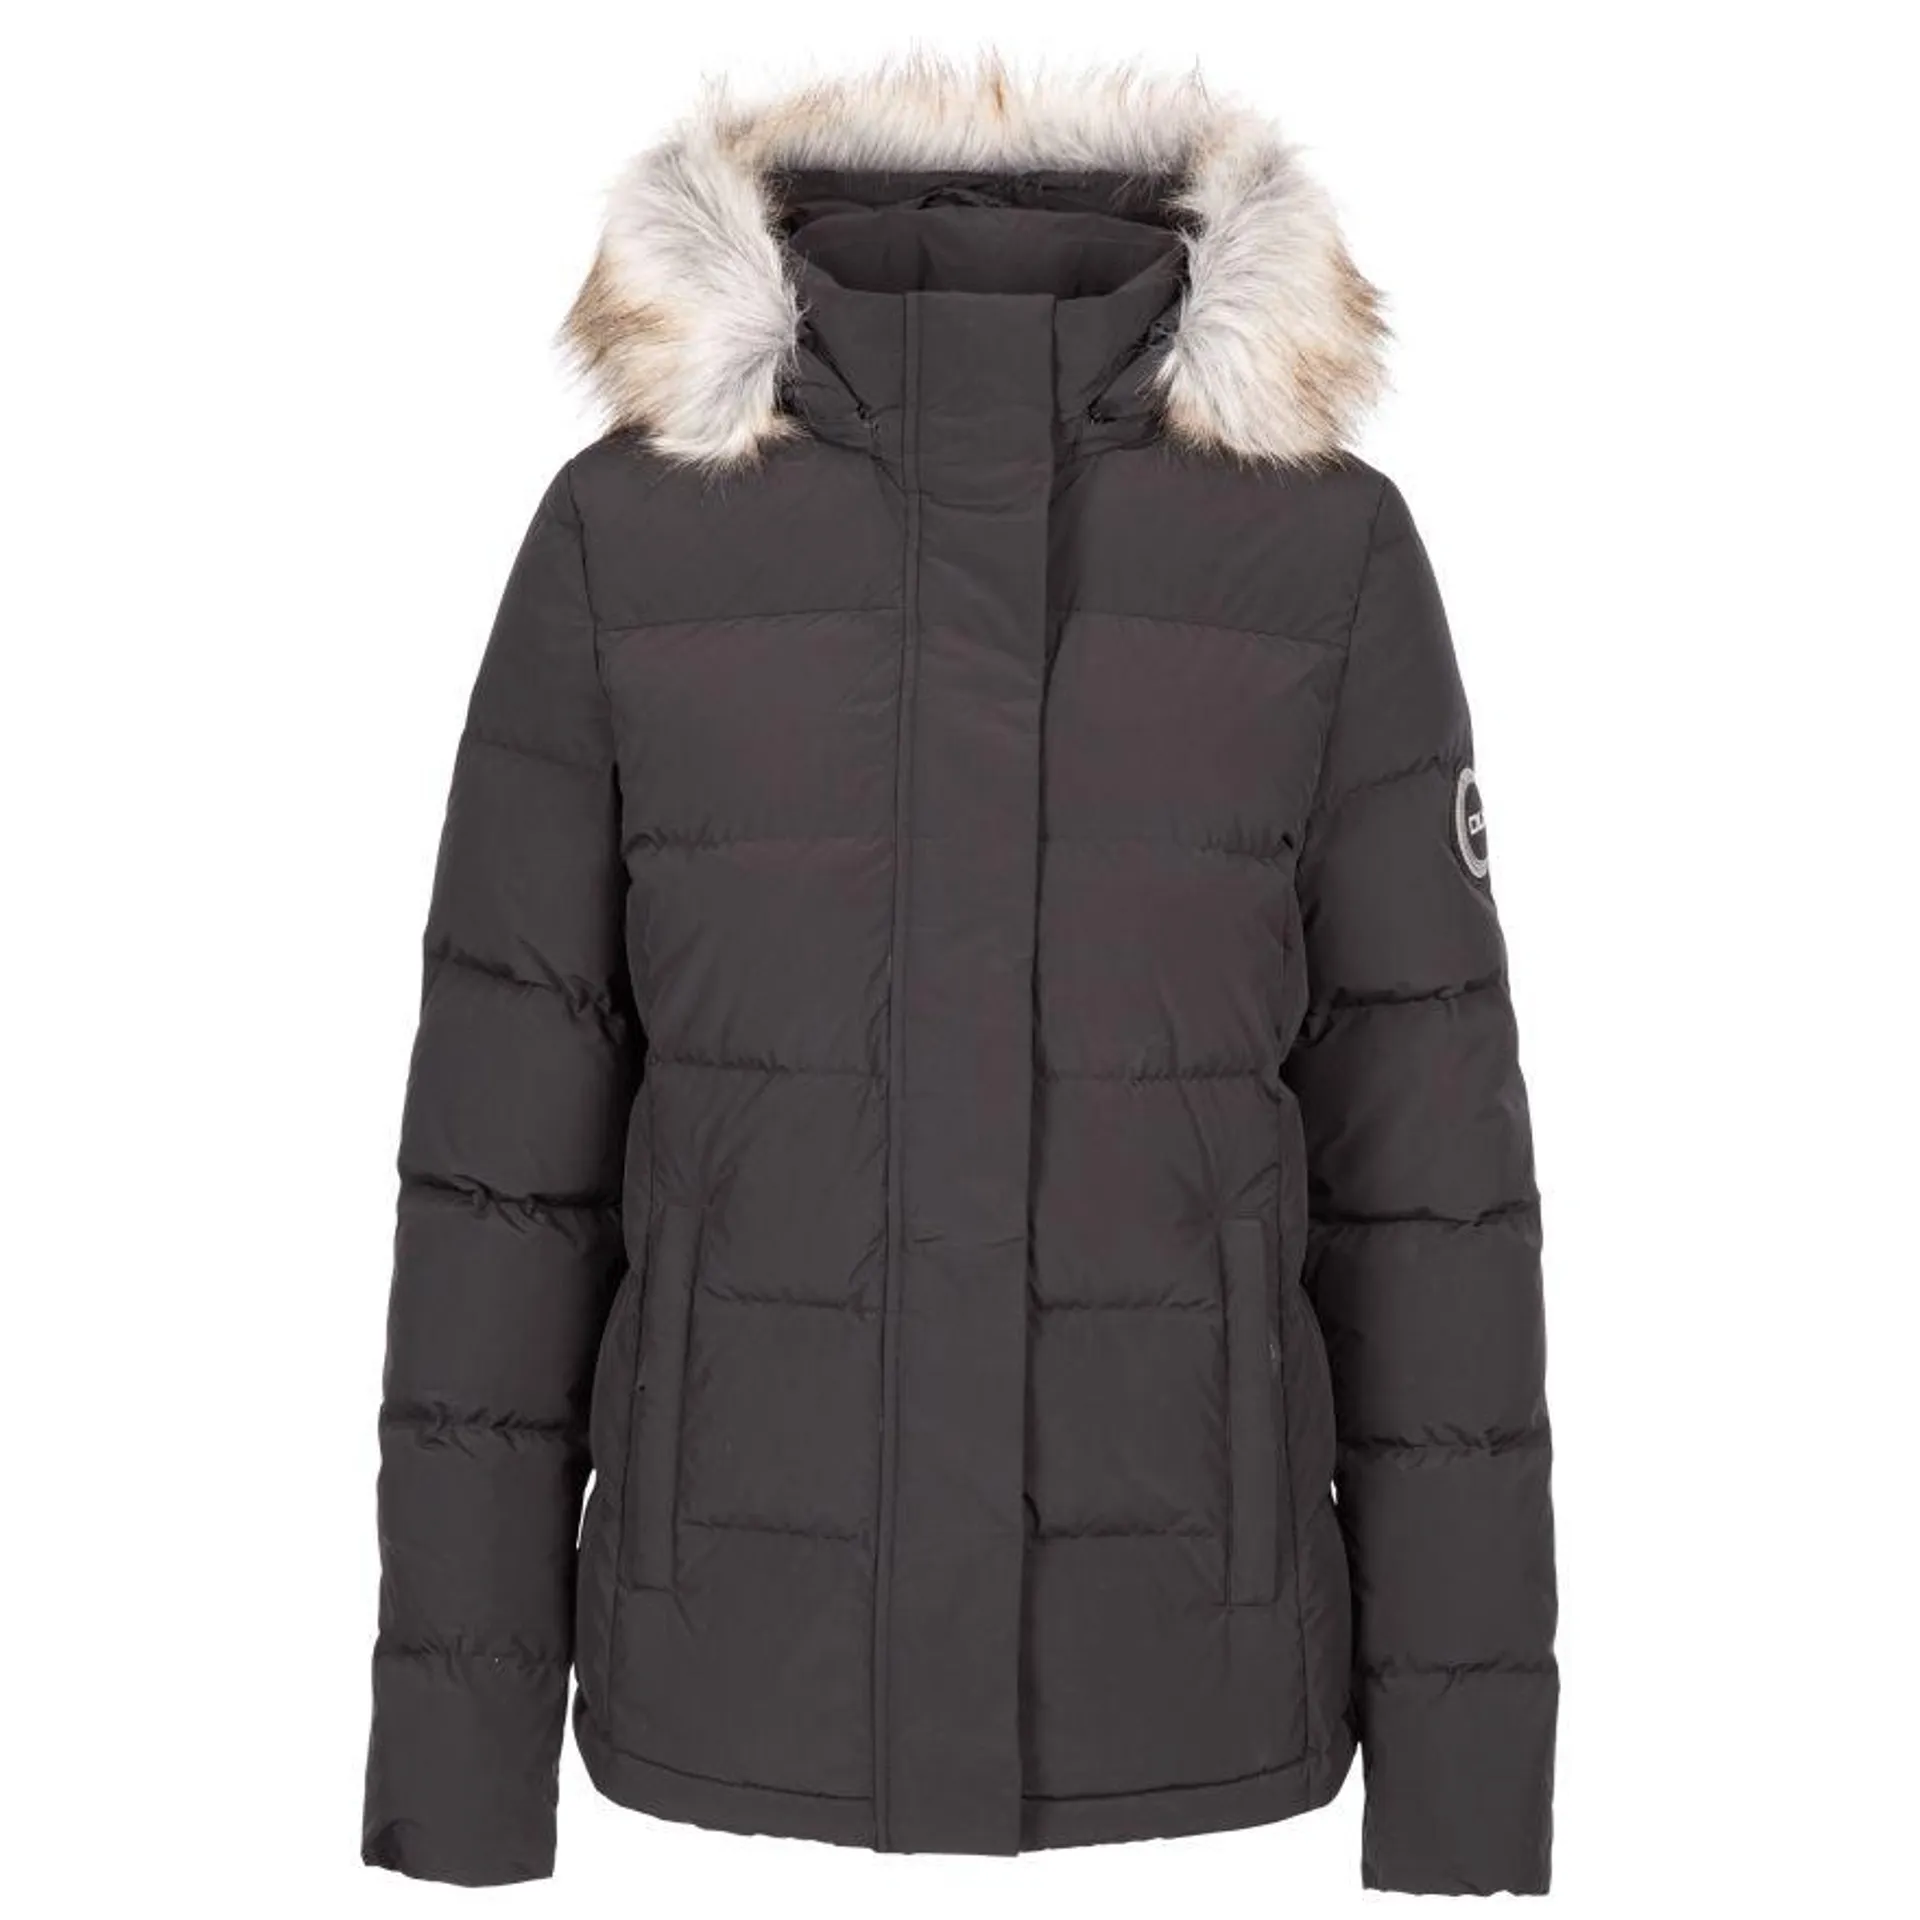 Women's DLX Down Jacket Composed